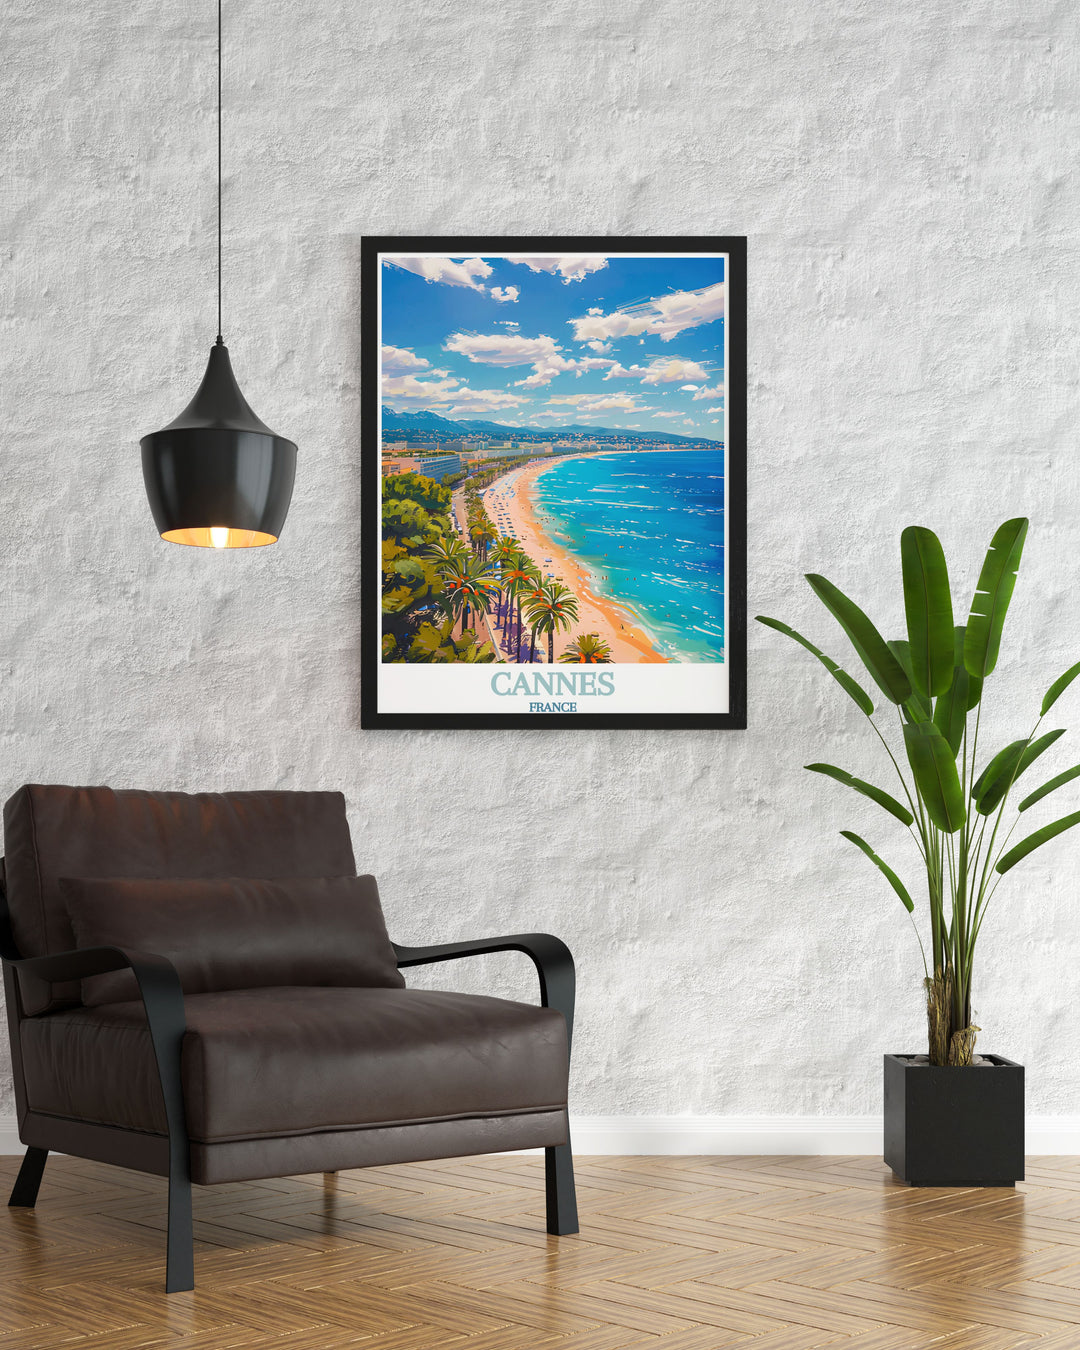 Stunning La Croisette poster highlighting the iconic palm lined boulevard of Cannes this France wall art is a perfect representation of French elegance and charm an ideal France travel art piece for any art collector or travel enthusiast